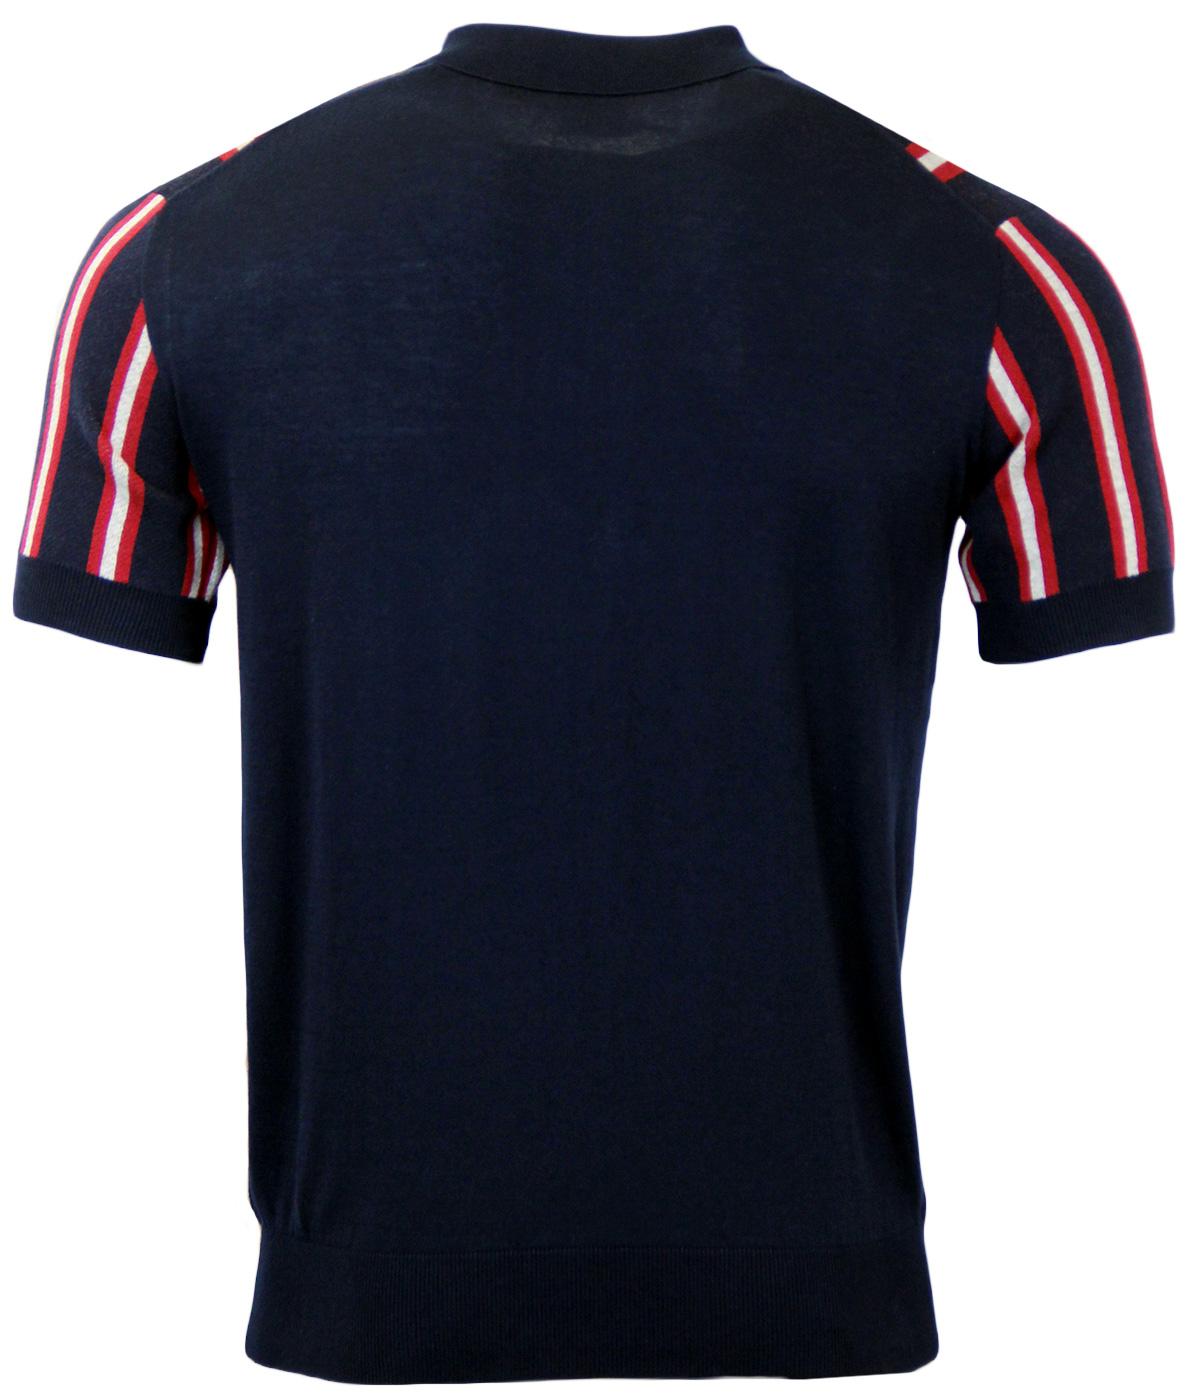 MERC Jobling Retro Mod Boating Stripe Knitted Polo in Navy